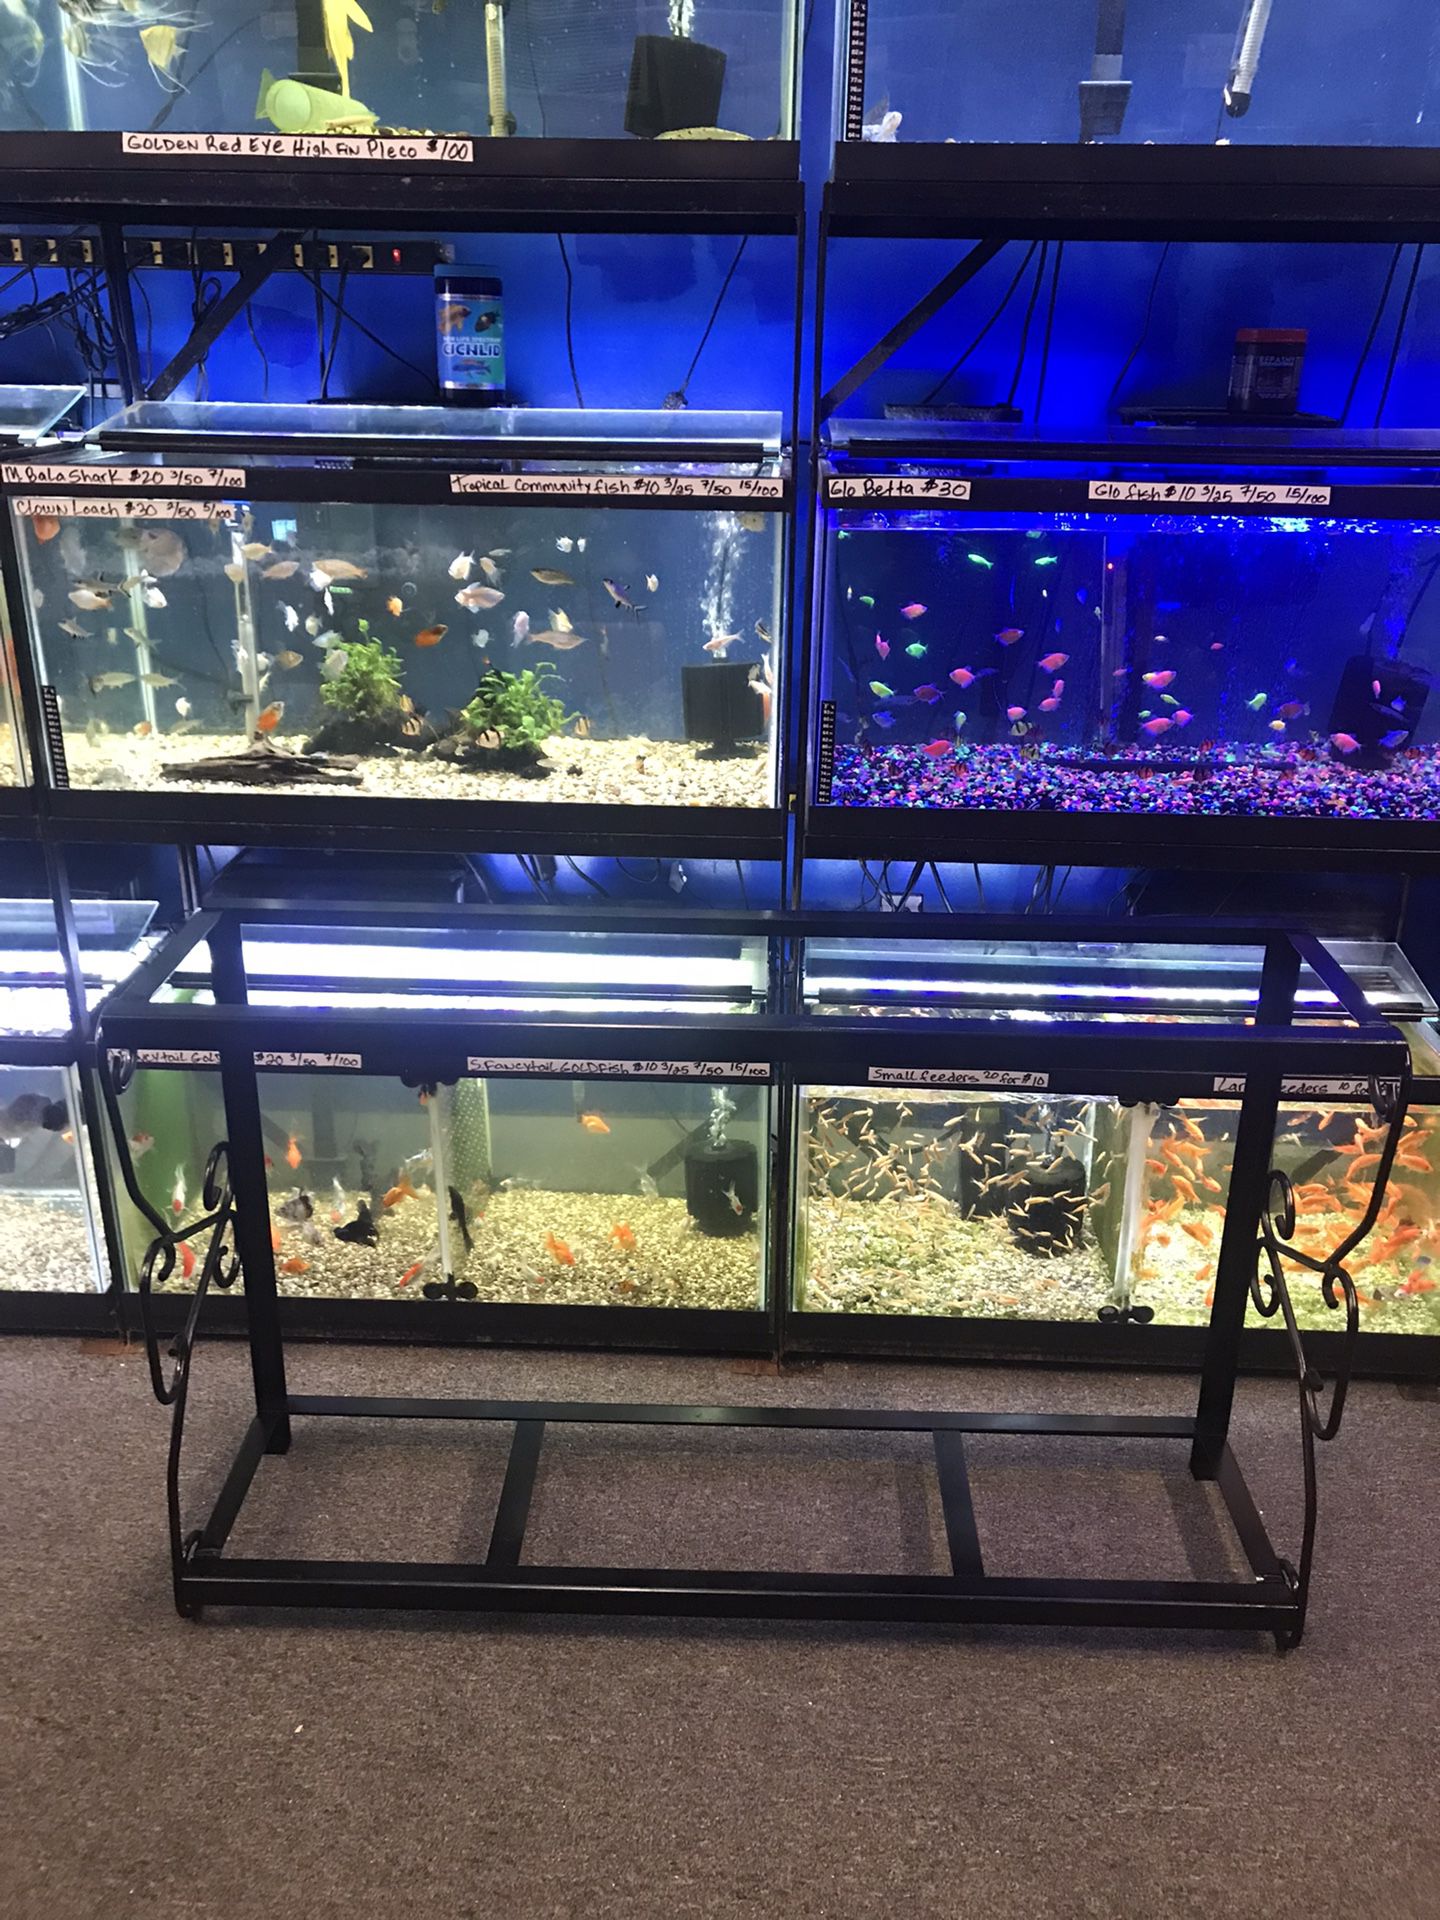 Stand For A 55 gallon Fish Tank $100